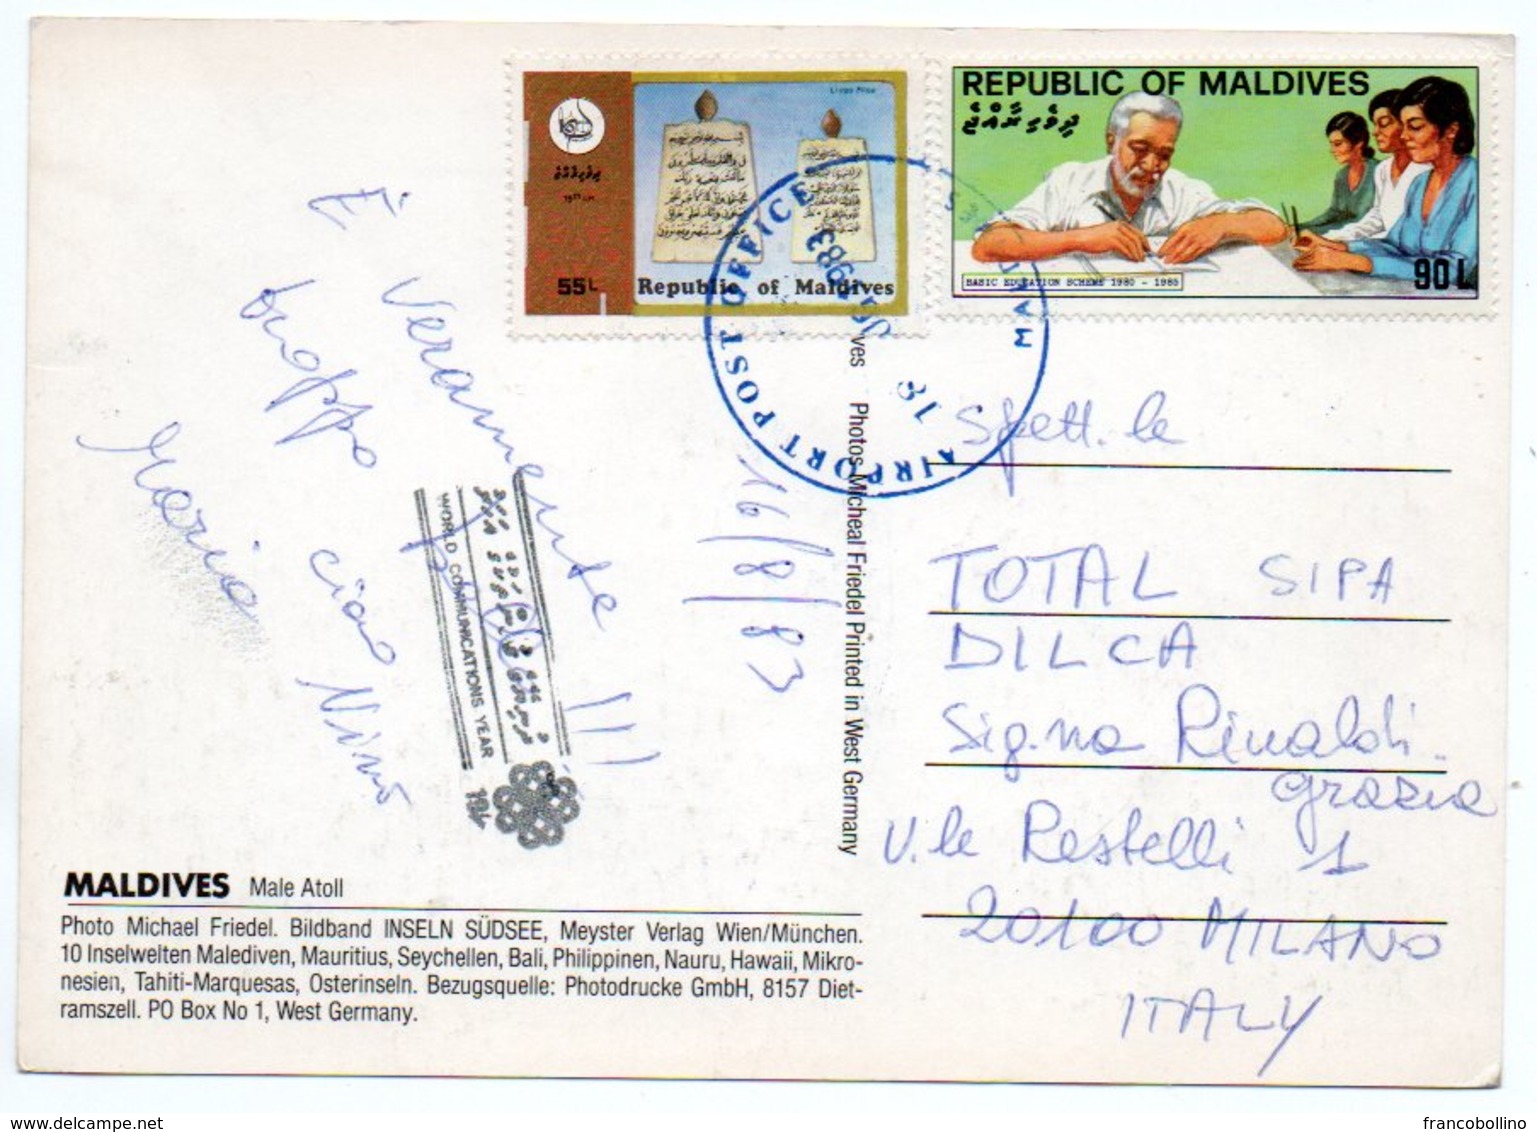 MALDIVES - MALE ATOLL (PHOTO MICHAEL FRIEDEL N.23/60) / THEMATIC STAMPS-EDUCATION - Maldives